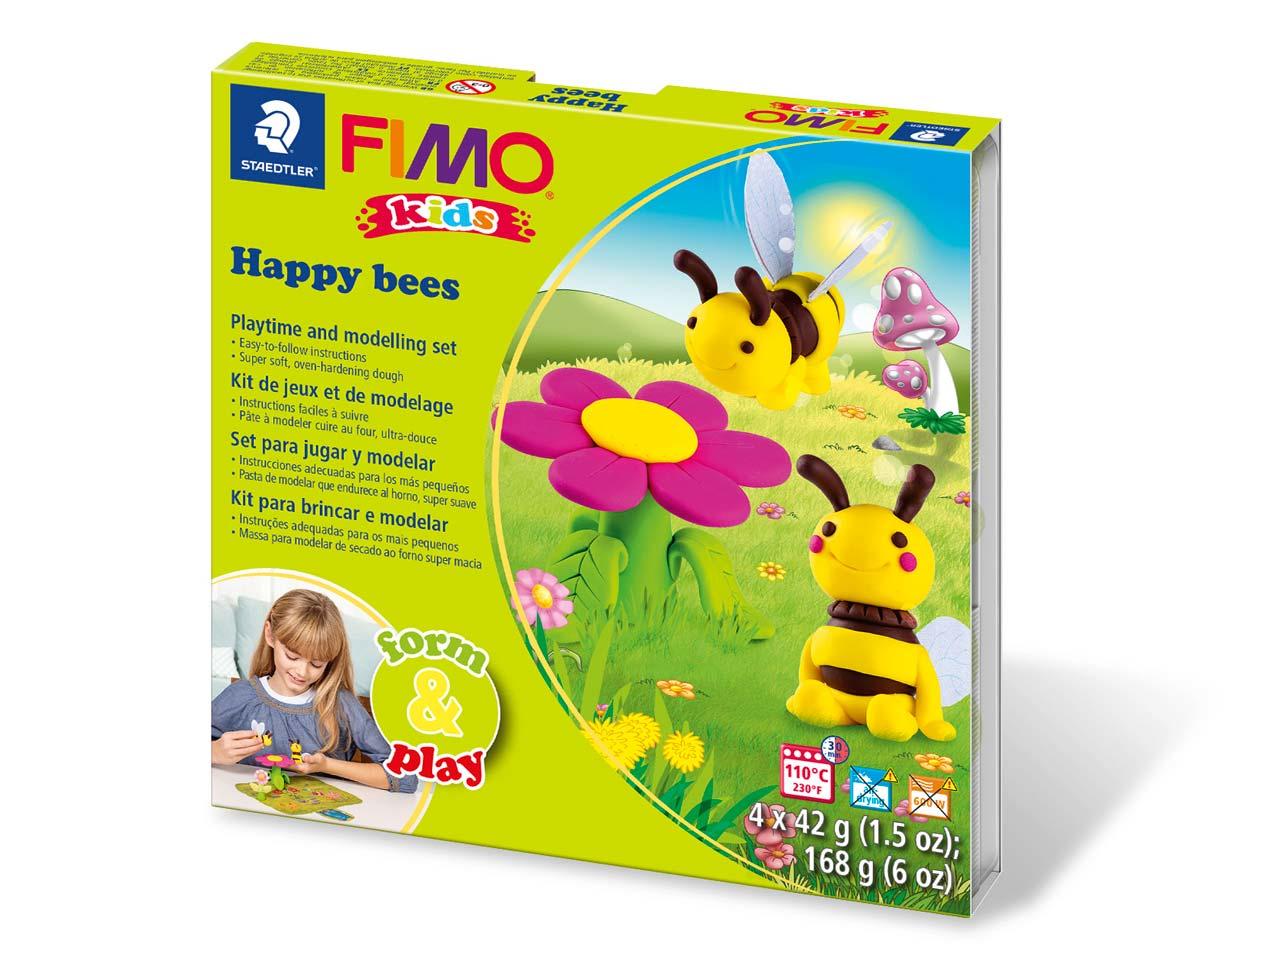 Box for FIMO Happy Bees modelling kit